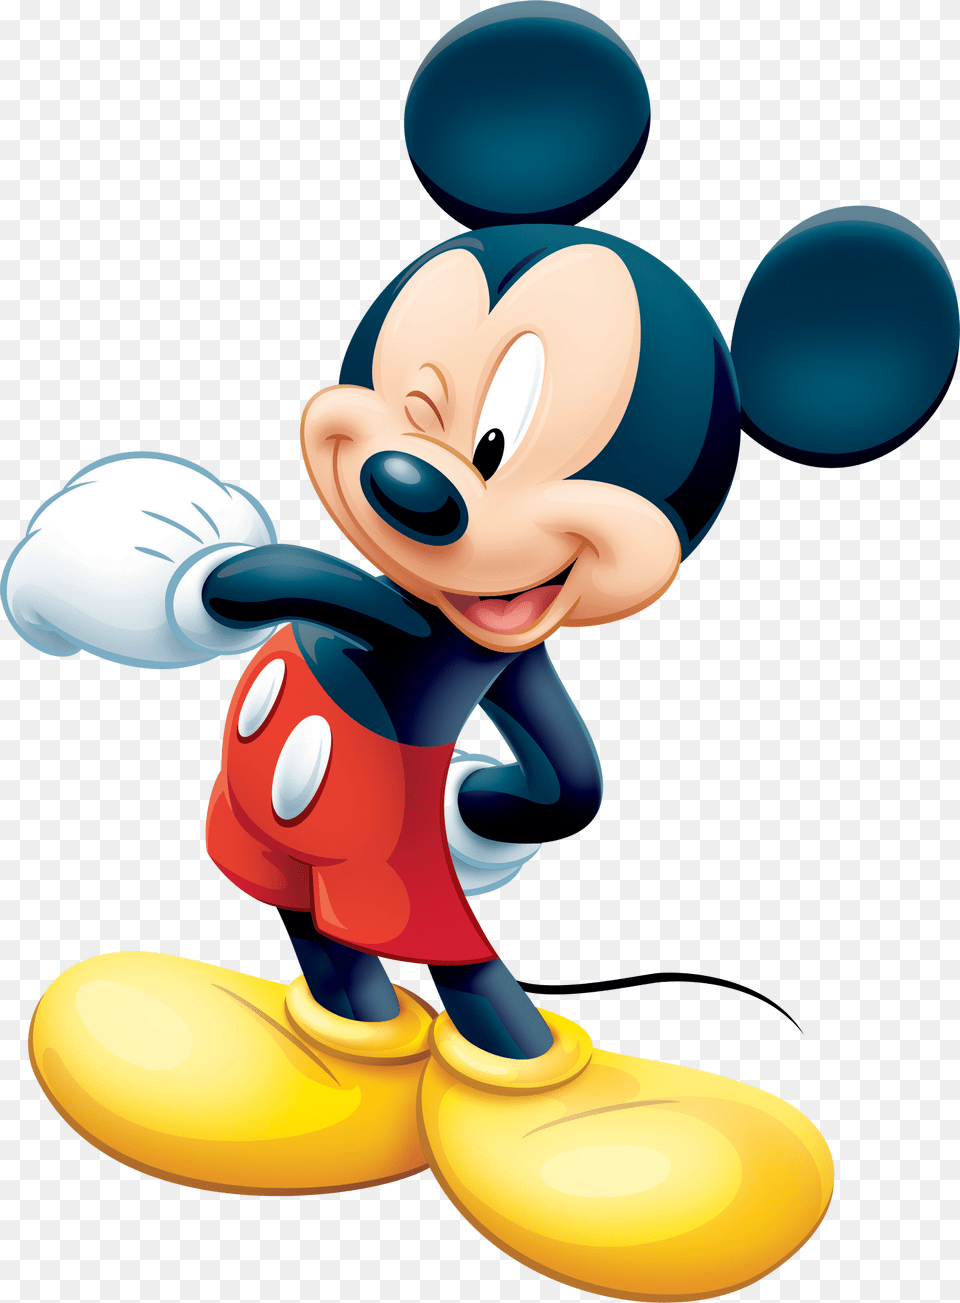 Mickey Mouse Wink Image Mickey, Cartoon, Nature, Outdoors, Snow Png